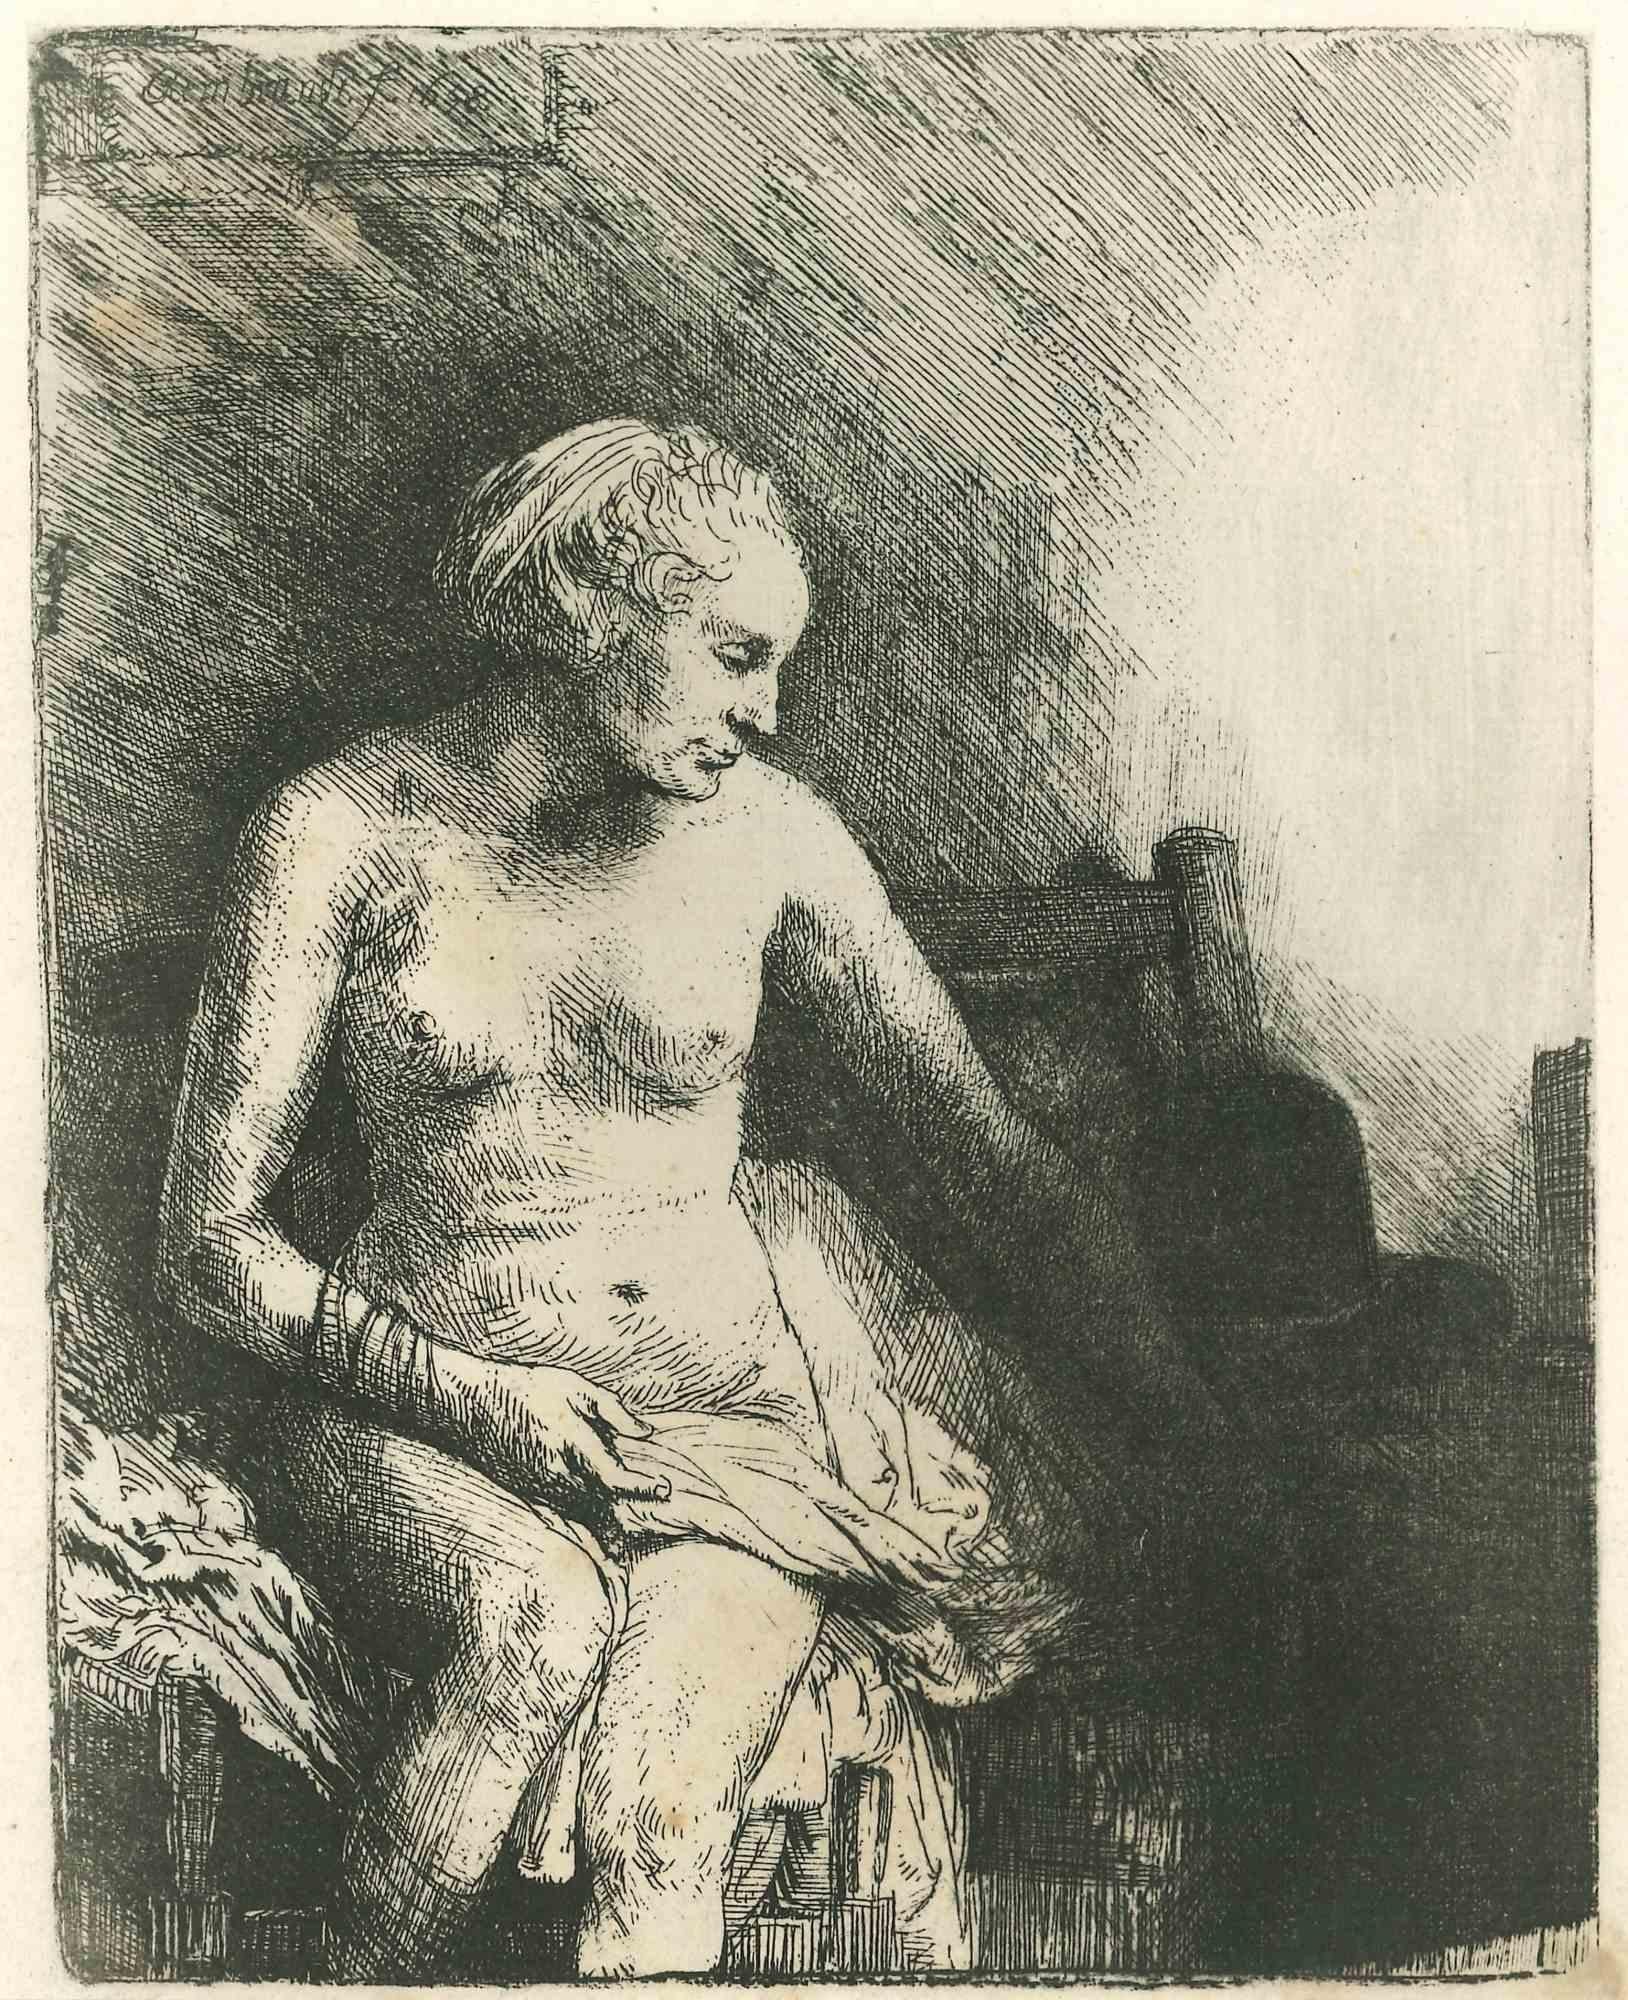 Charles Amand Durand Figurative Print - Woman in the Bathroom I - Engraving After Rembrandt - 19th Century